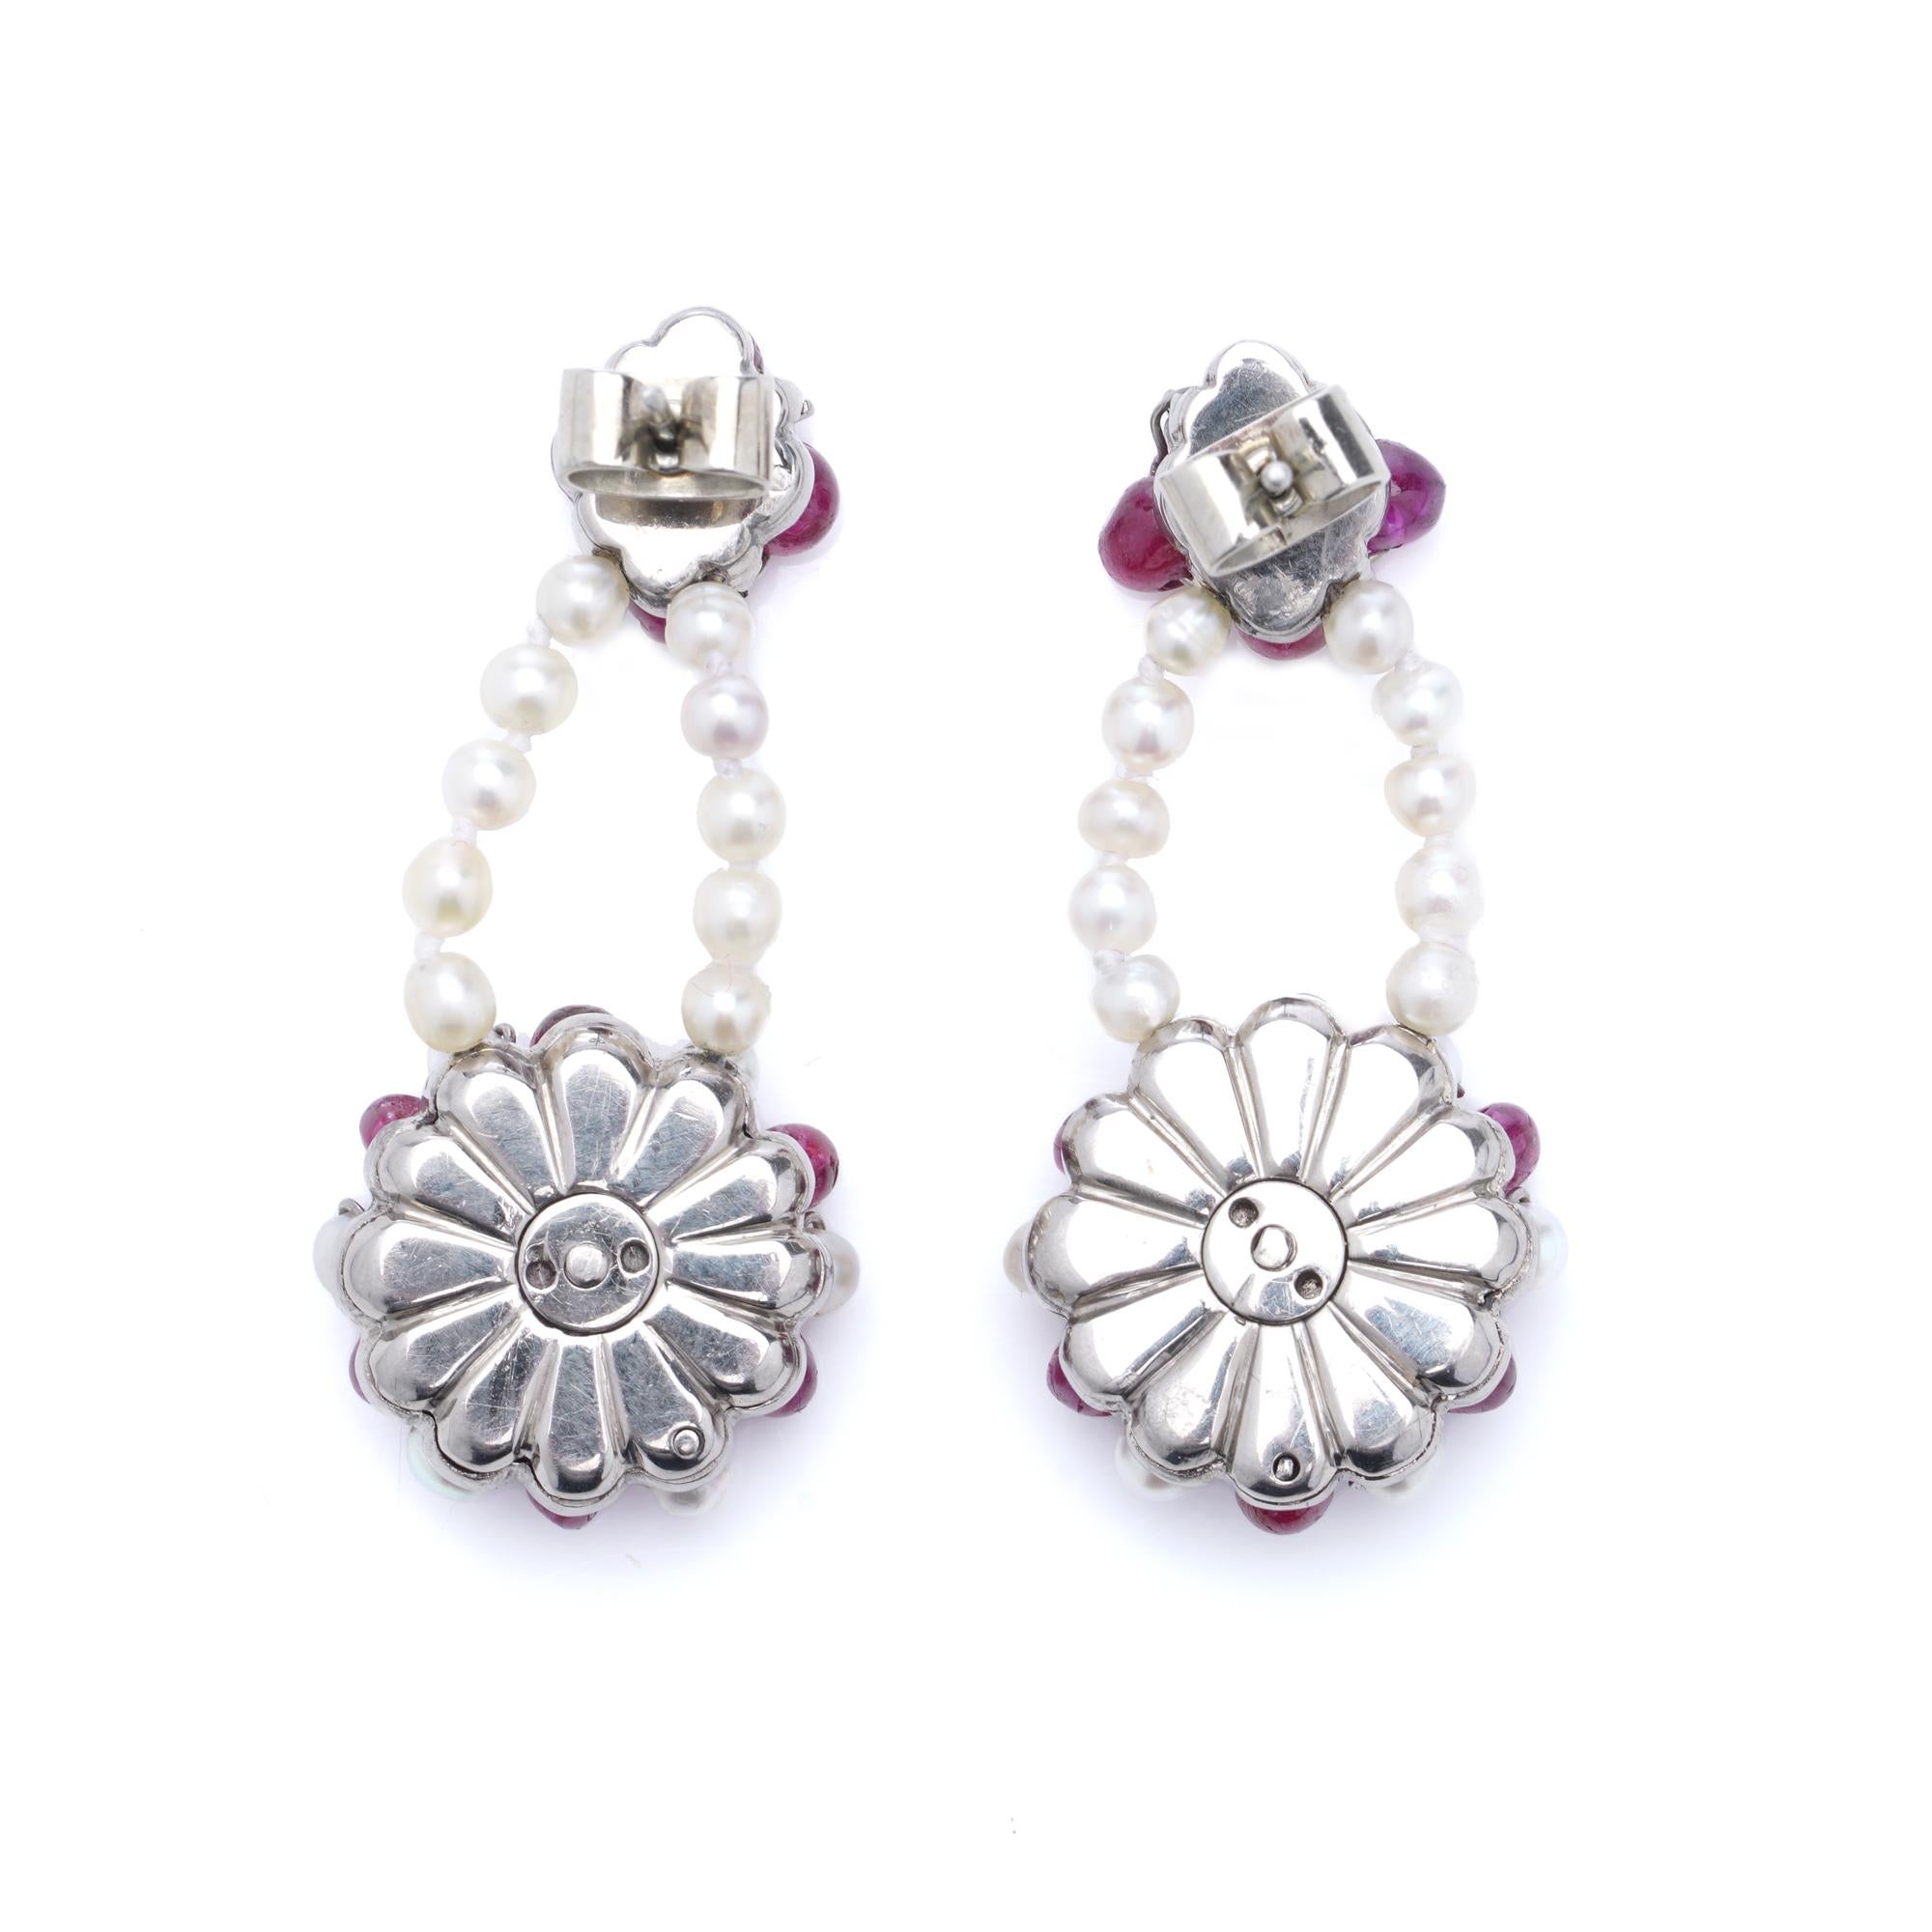 18-Karat White Gold Floral Drop Earrings with Burma Rubies and Pearls In Good Condition For Sale In Braintree, GB